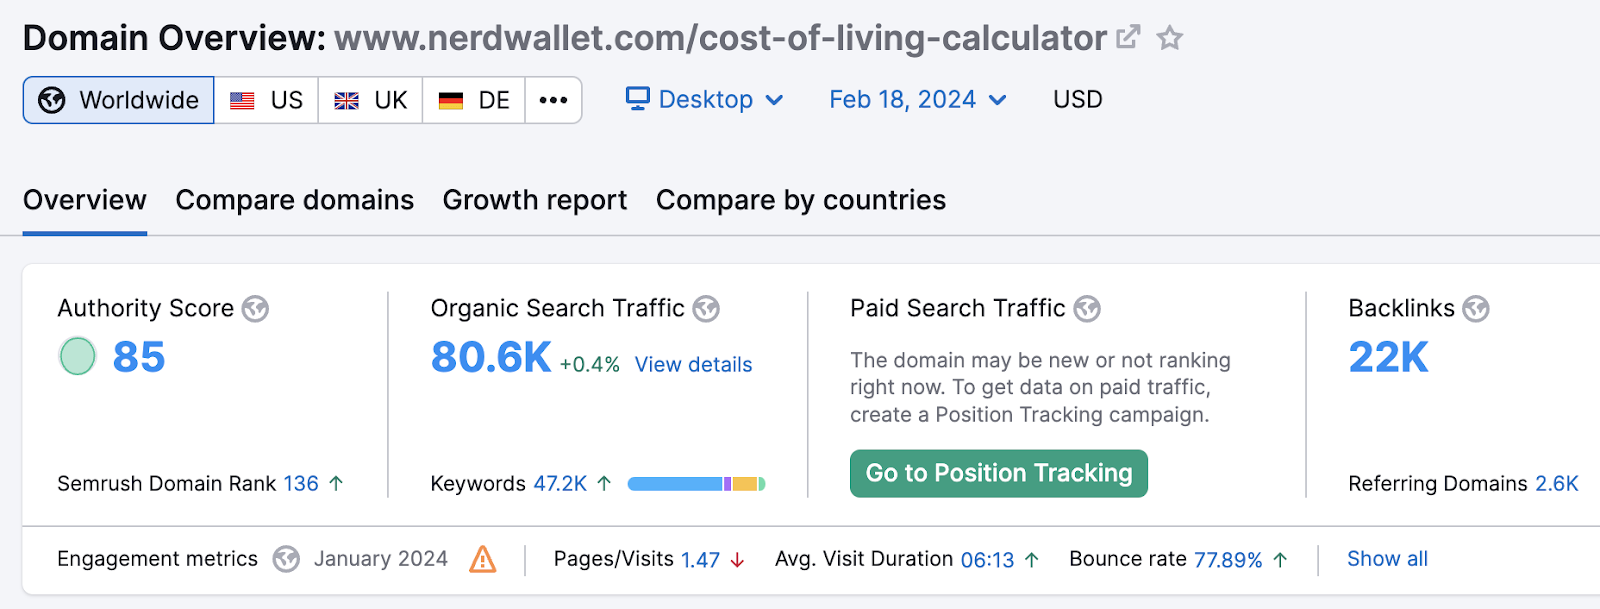 Domains and backlink info shown for NerdWallet's cost of living calculator page